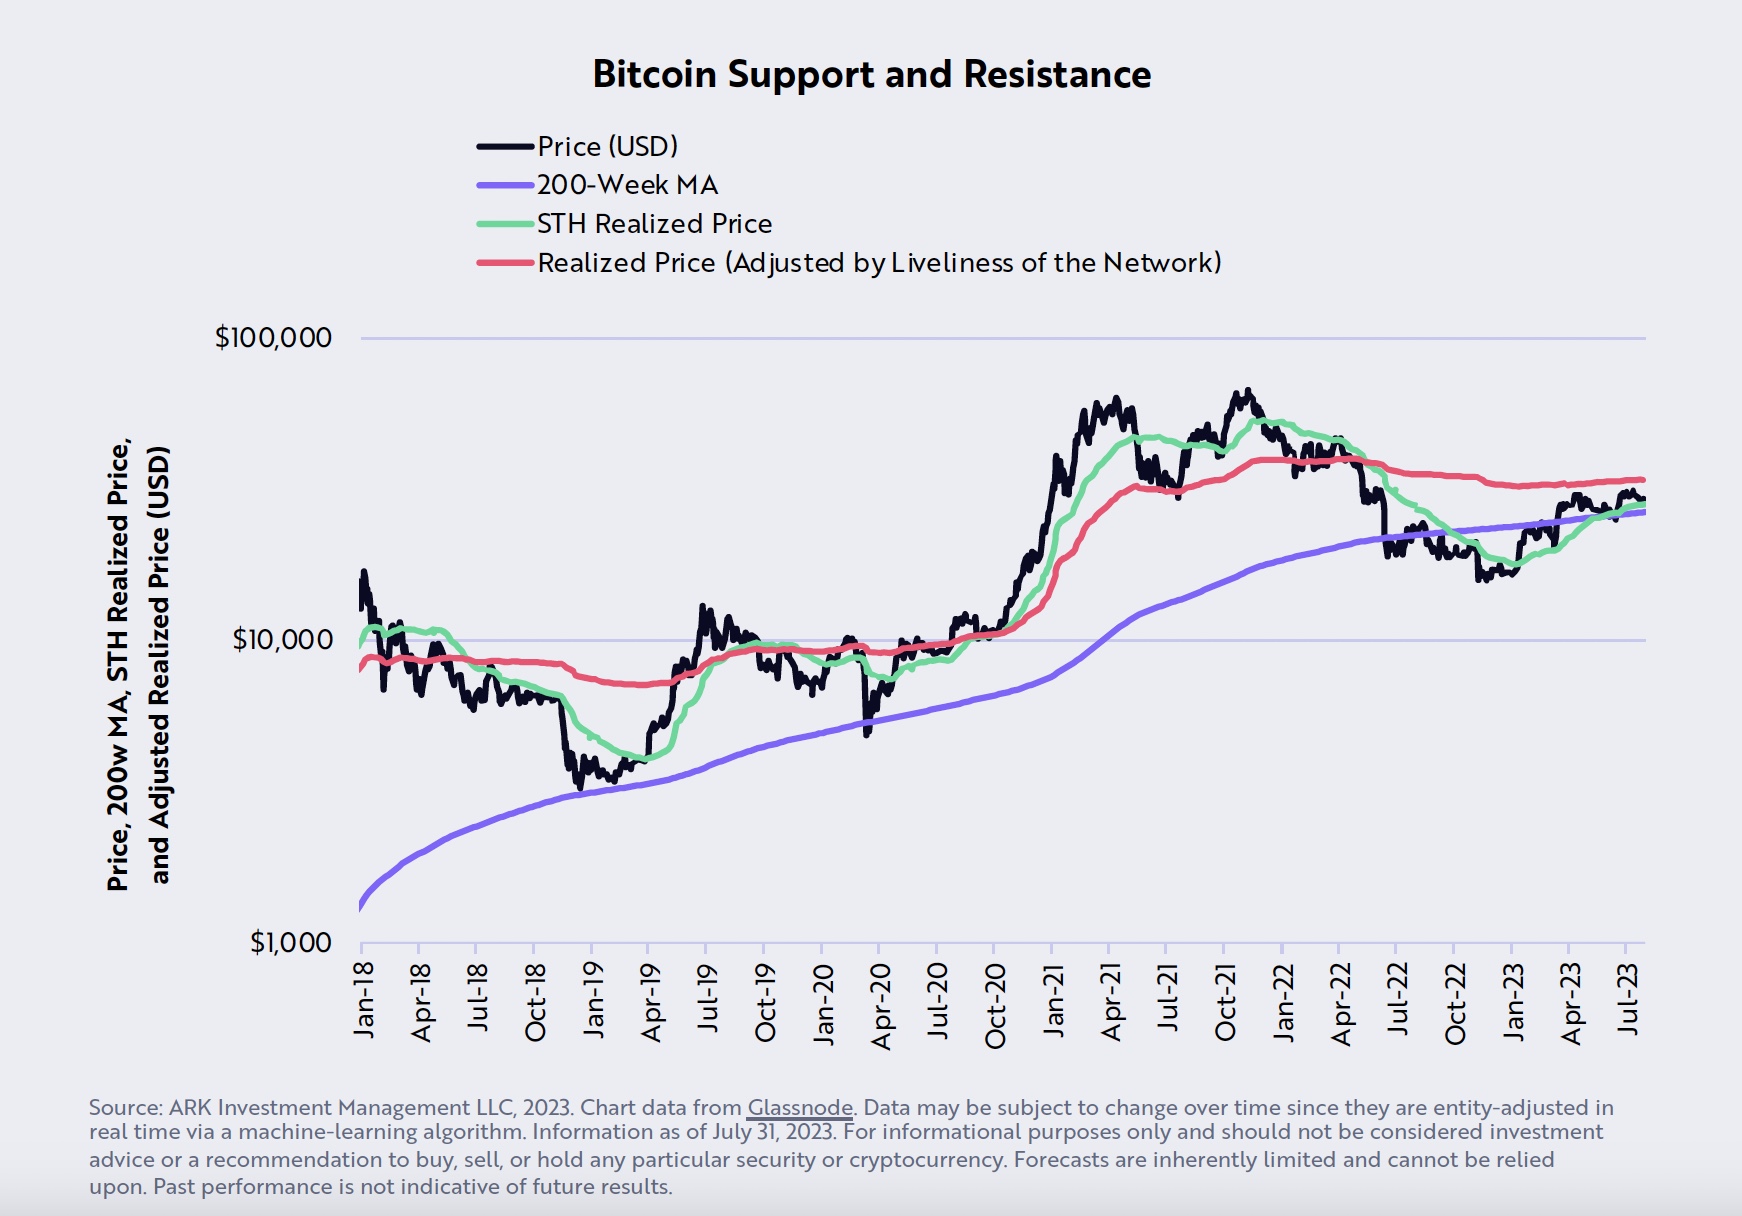 Bitcoin support and resistance